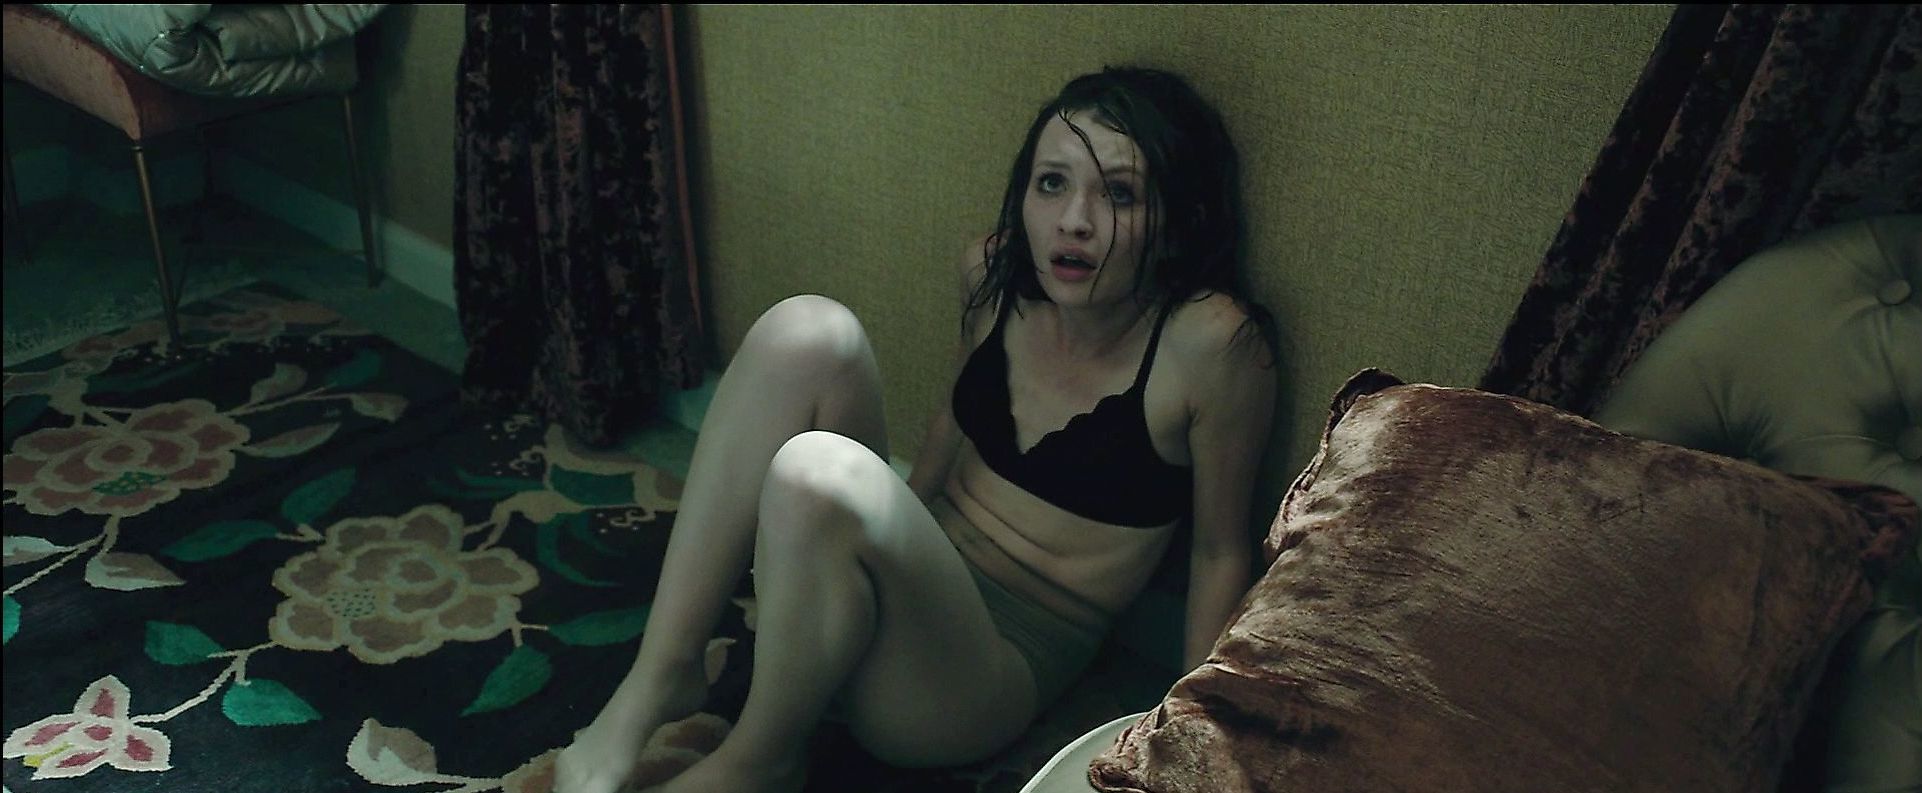 Naked pictures of emily browning